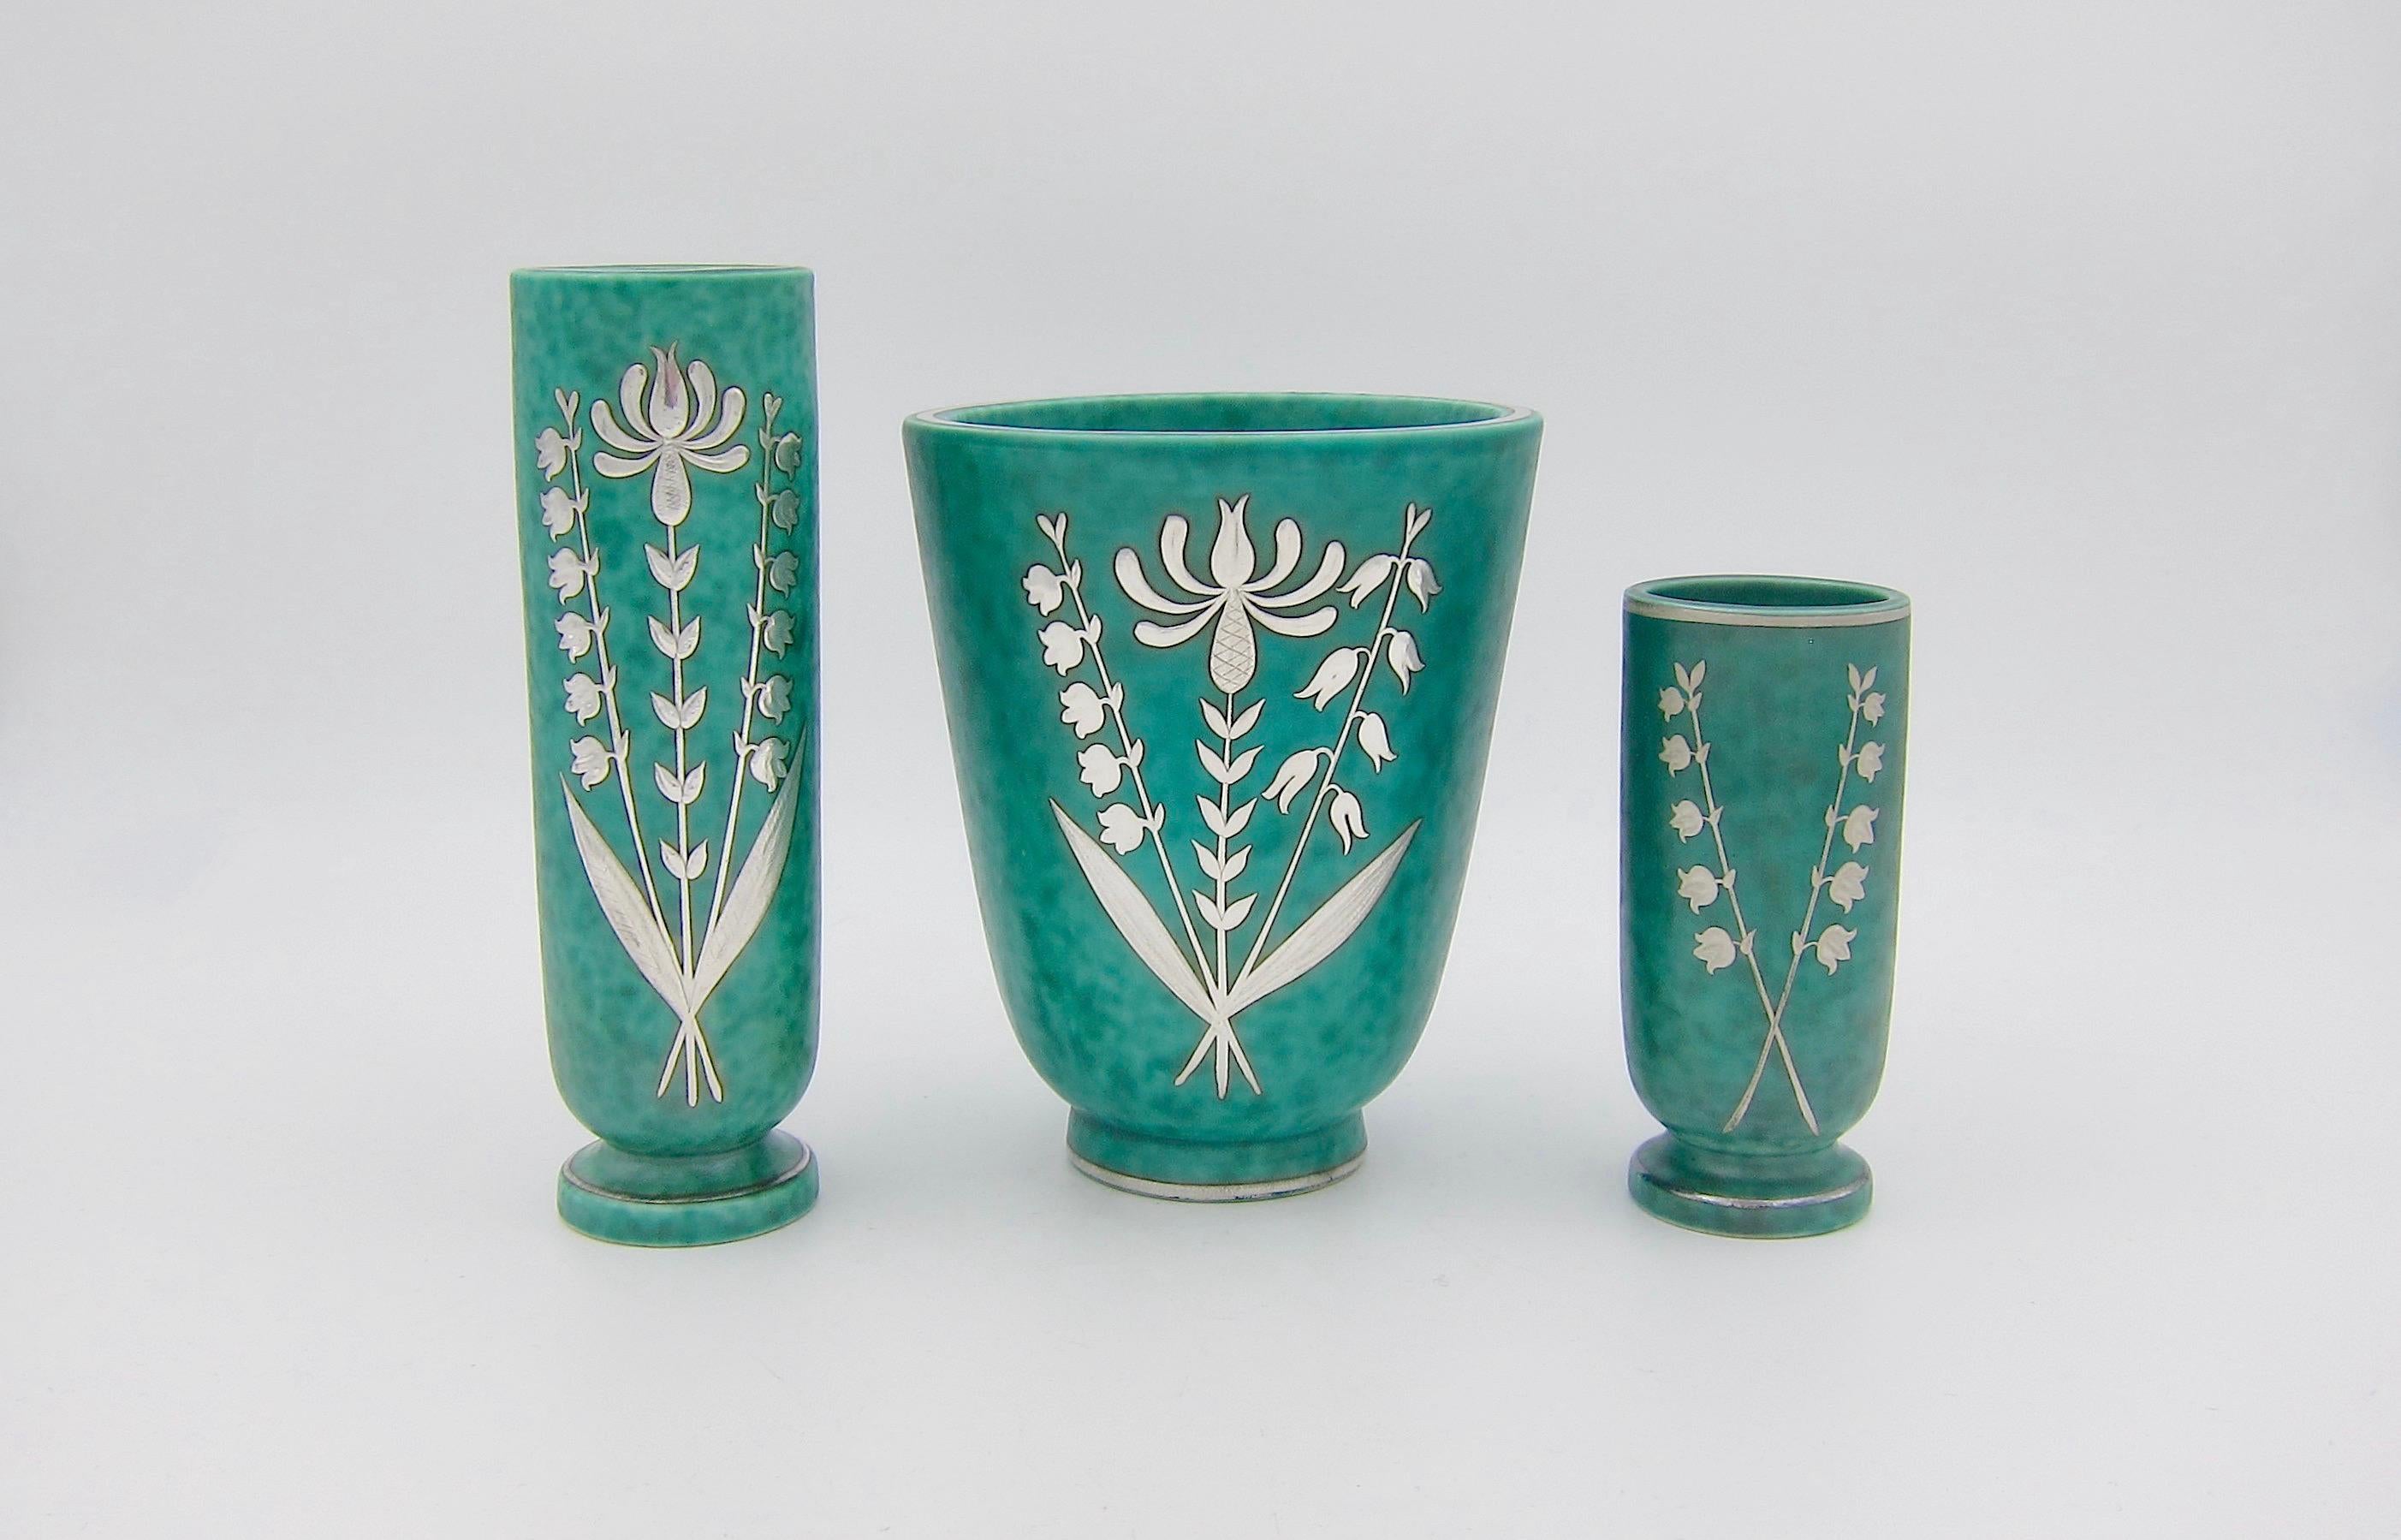 A vintage Scandinavian vase trio from the Gustavsberg Porcelain Factory of Sweden, designed by Swedish artist, painter and ceramist, Wilhelm Kåge (1889-1960), the artistic director of Gustavsberg from 1917 until 1948. These Art Deco vases are from